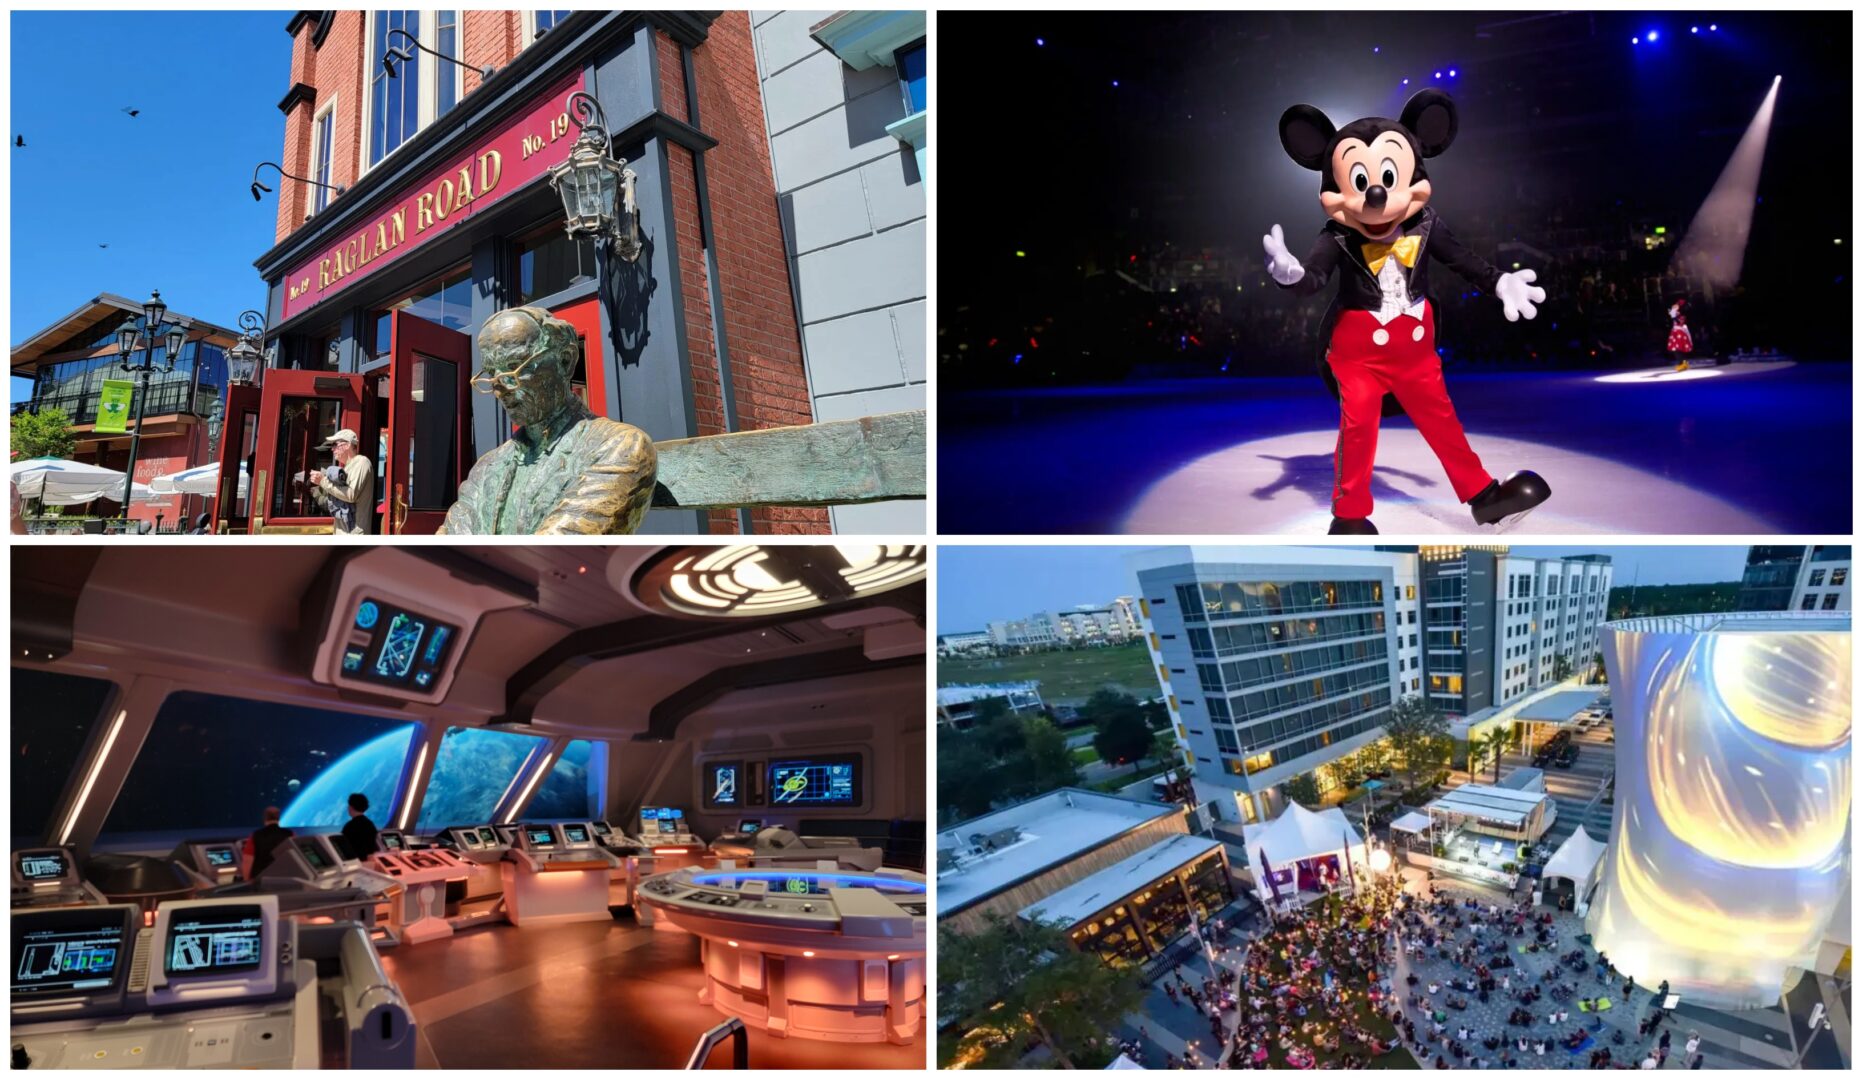 Disney News Highlights: Disney’s Lake Nona Campus Canceled, CA and FL Governors Respond, Star Wars Galactic Starcruiser Permanently Closing, New Passholder Magnet